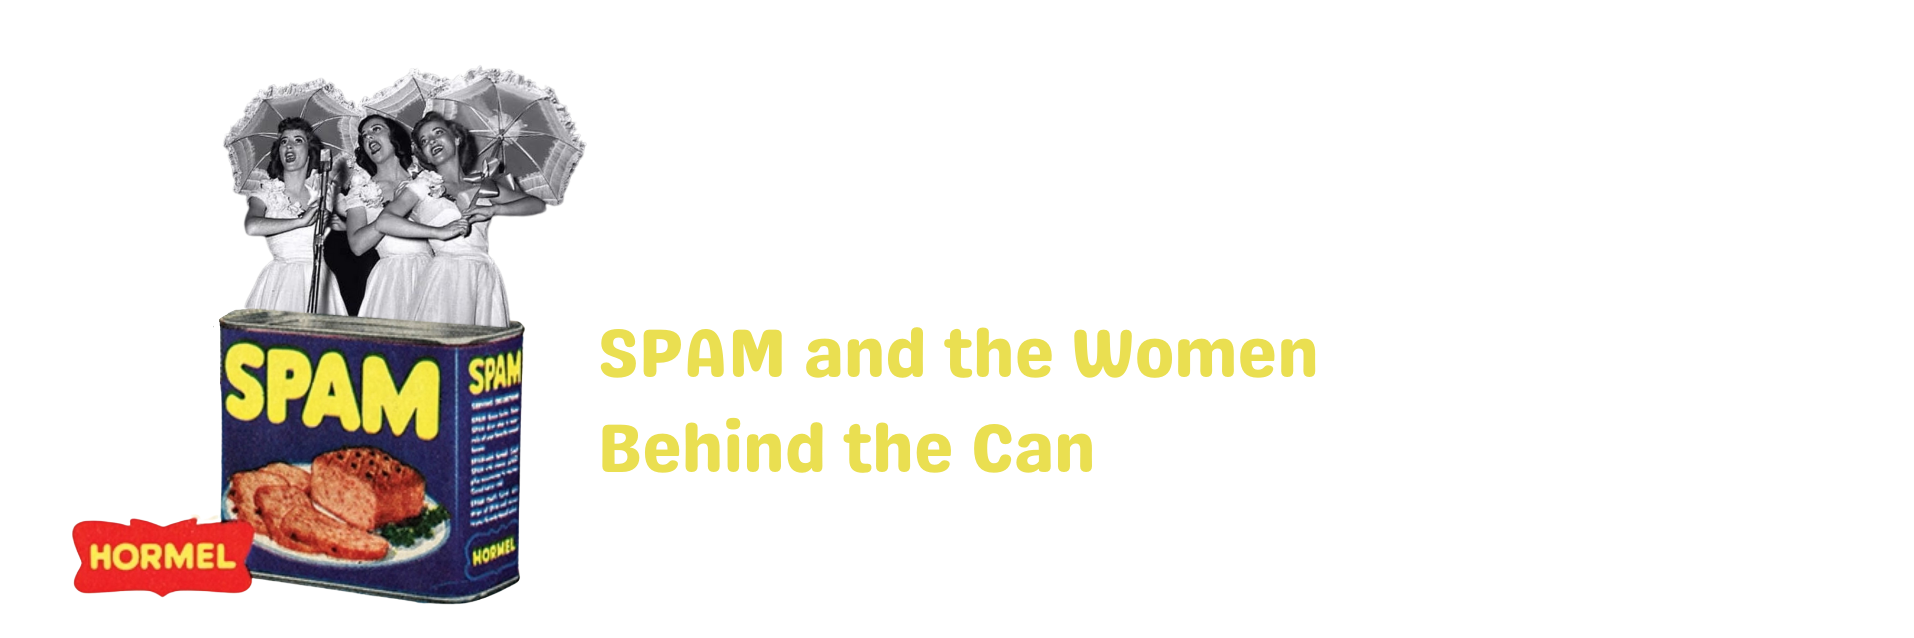 Marching Beyond the Kitchen: SPAM and the Women Behind the Can